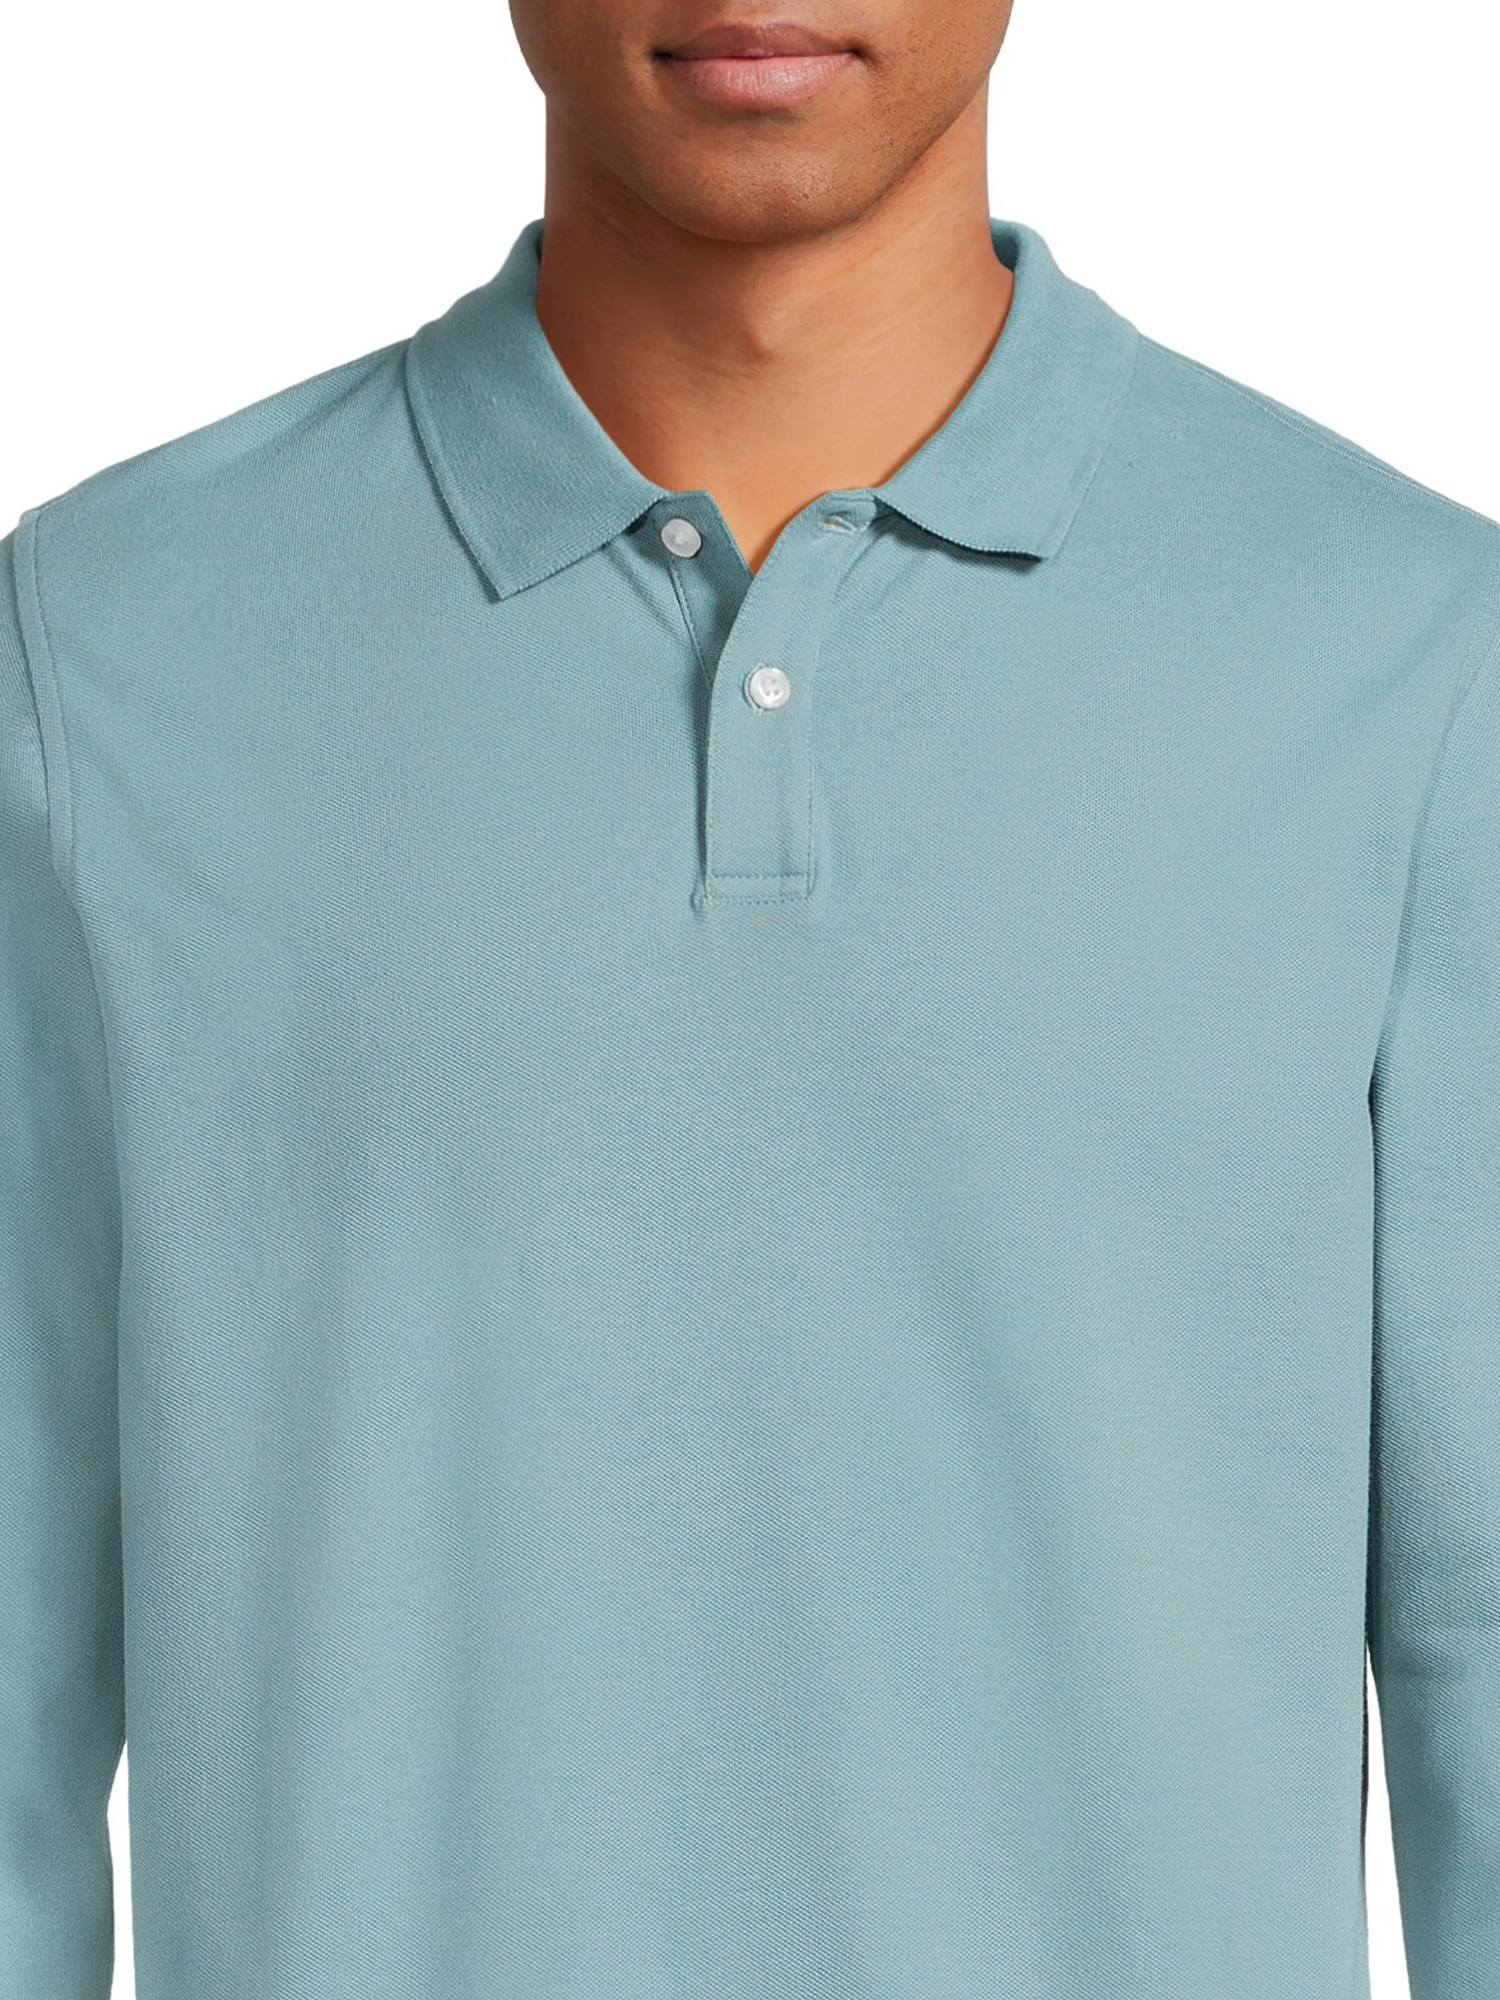 George Men's Pique Polo Shirt with Long Sleeves, Sizes S-3XL - image 5 of 6